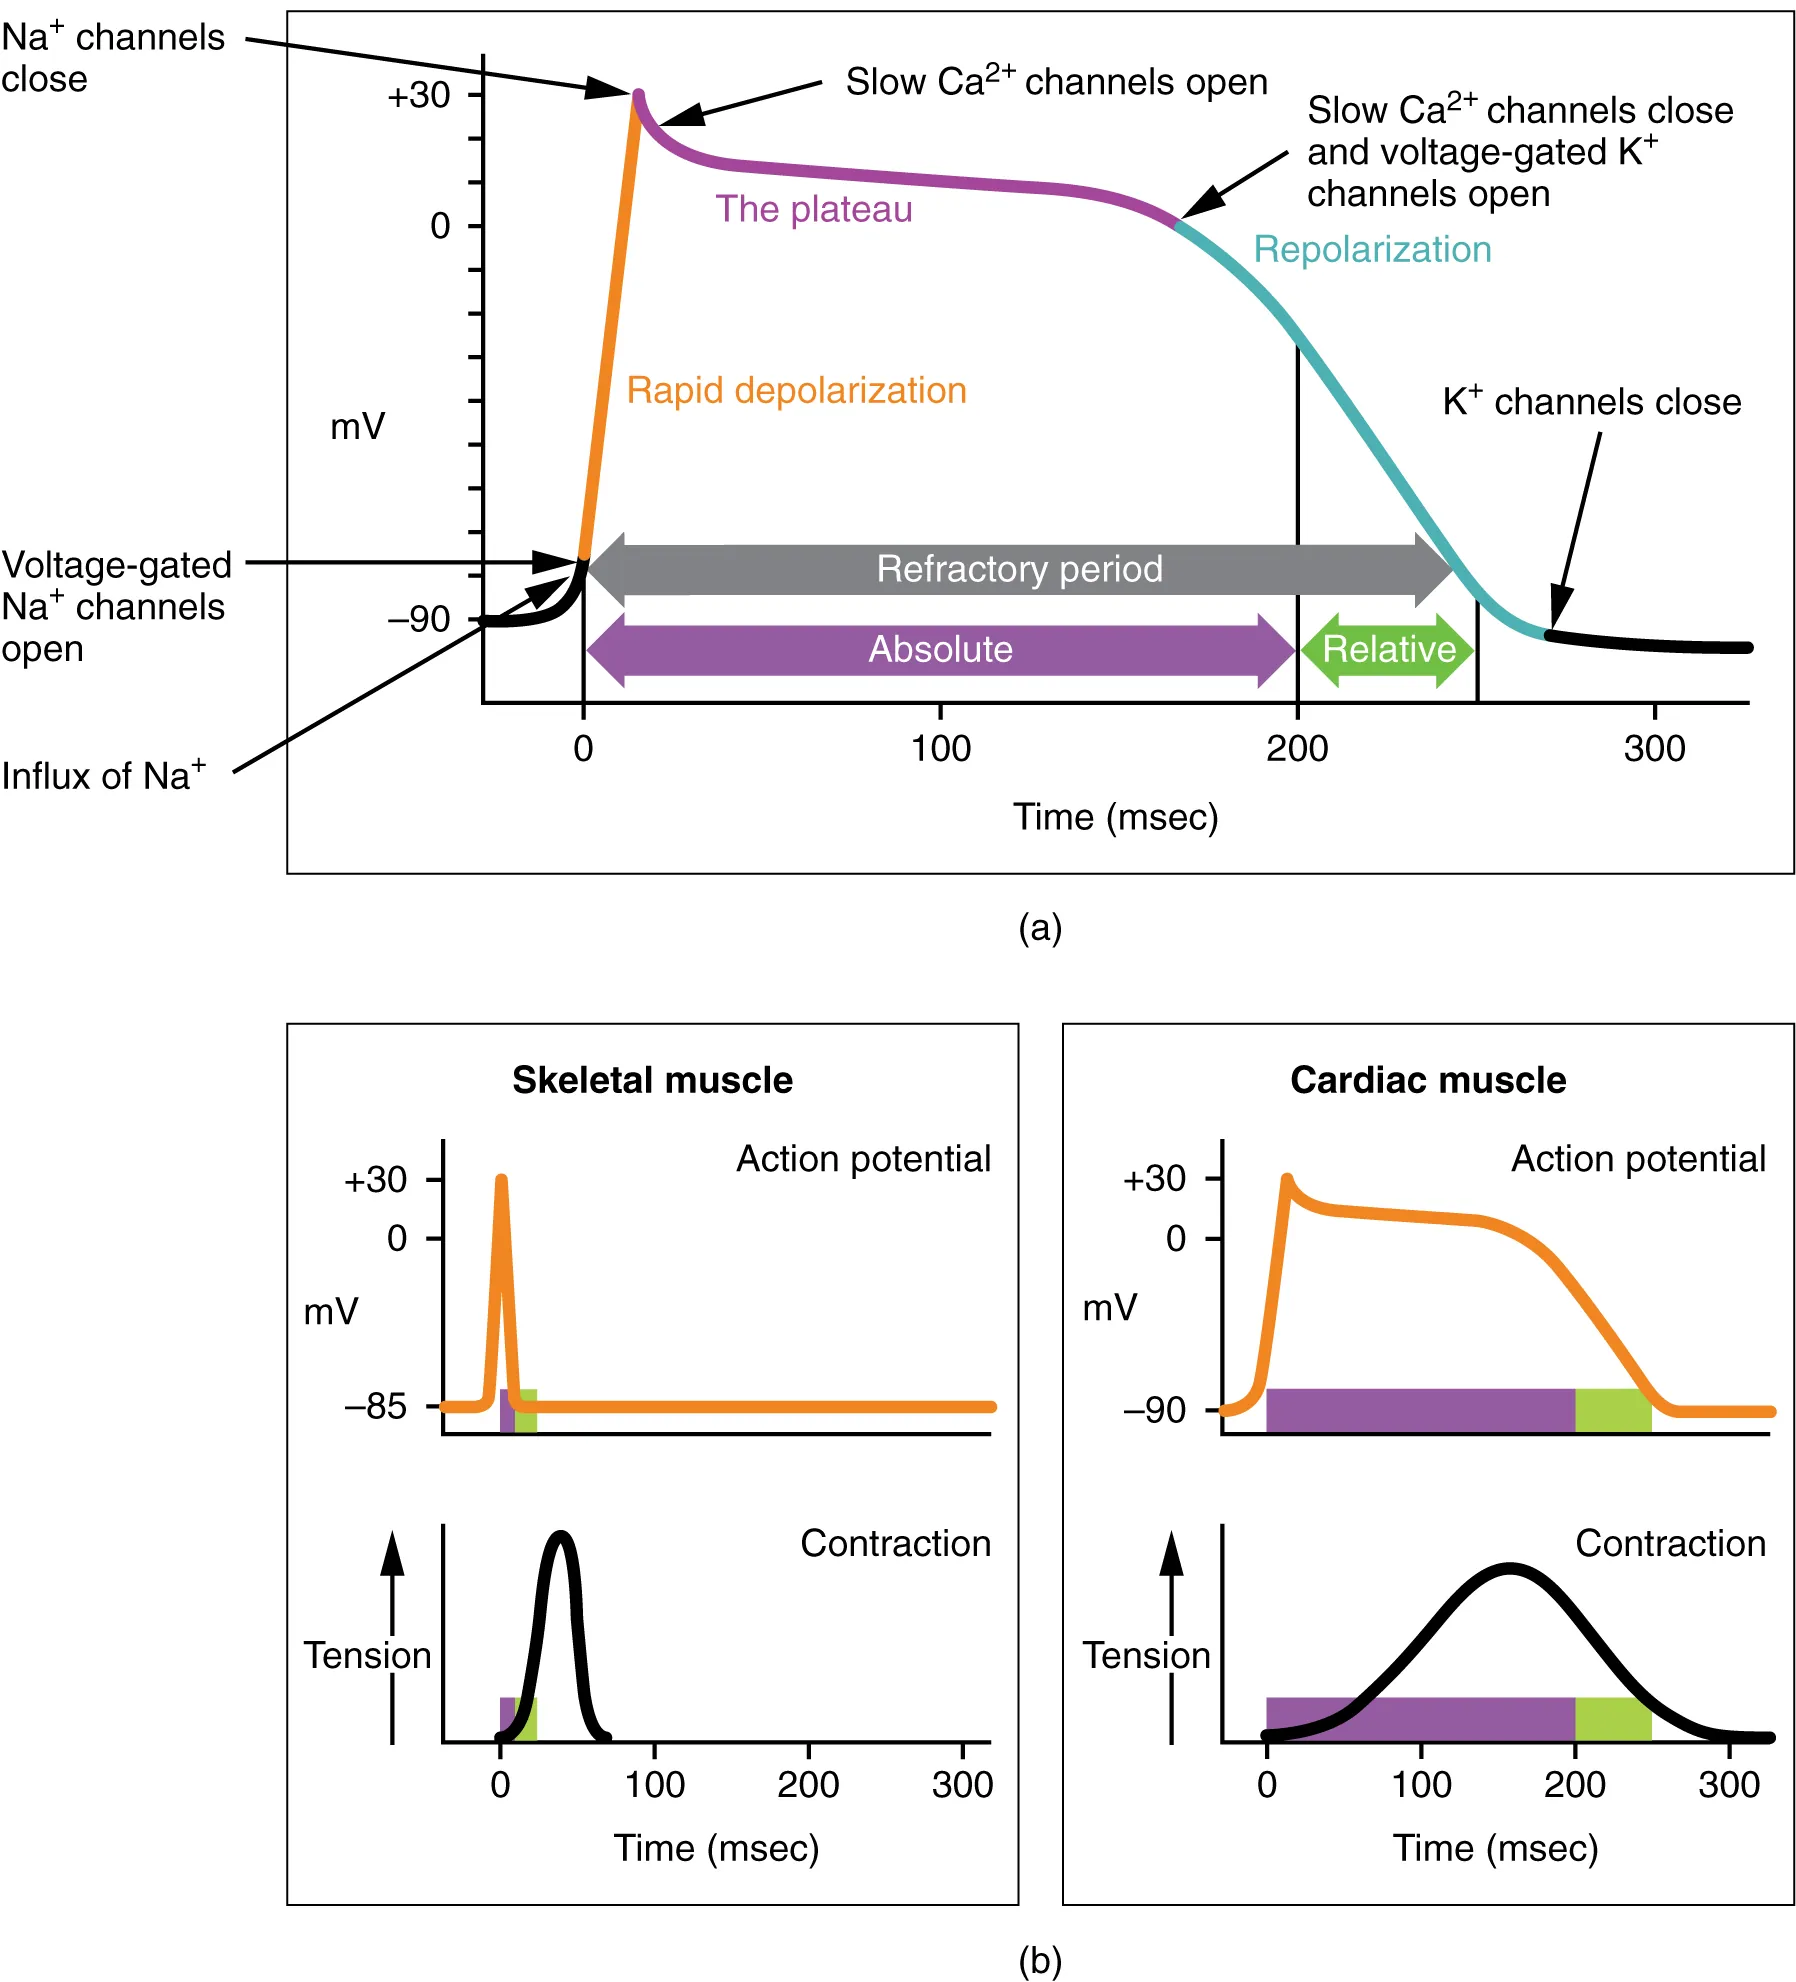 The top panel of this figure shows millivolts as a function of time with the various stages labeled. The bottom left panel shows action potential and tension as a function of time for skeletal muscle, and the bottom right panel shows the action potential and tension as a function of time for cardiac muscle.